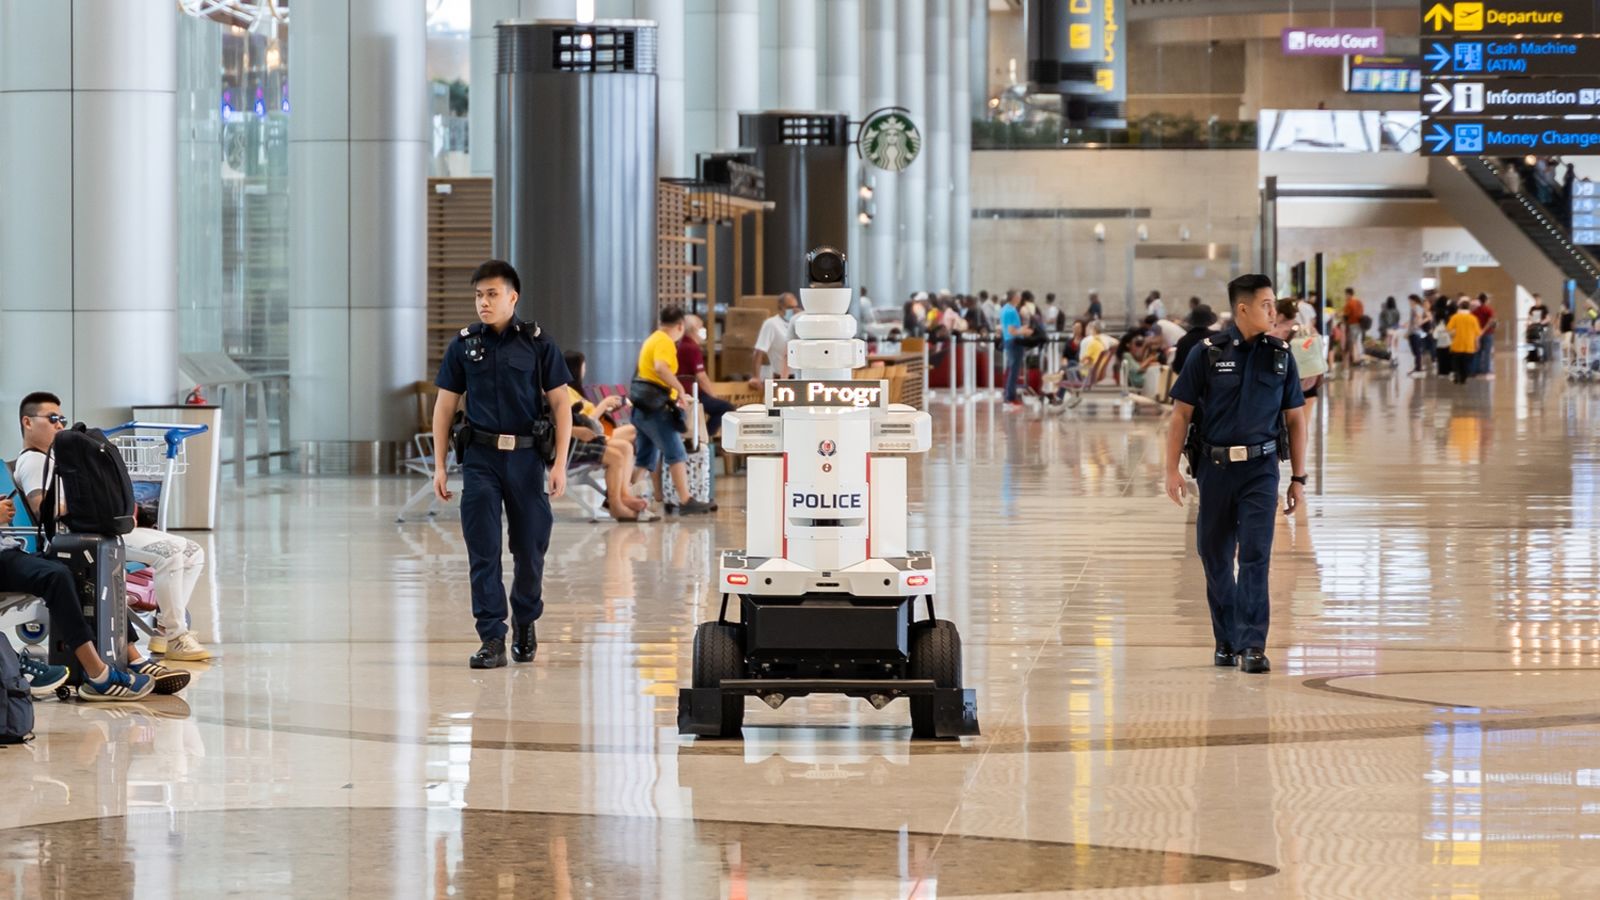 Sci-fly: The robots coming to an airport near you - Airport Technology